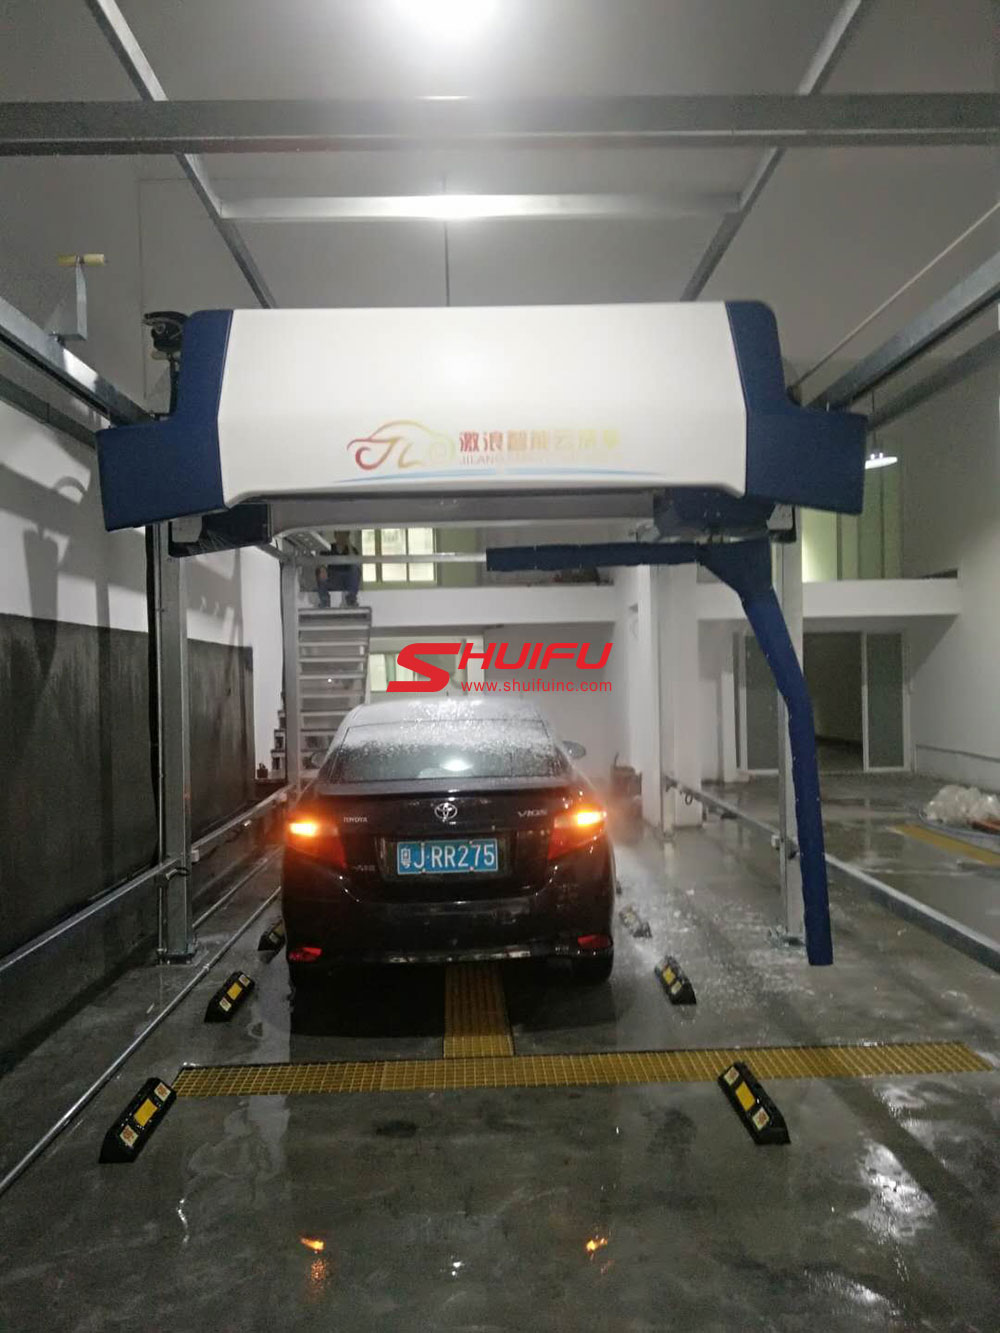 Automatic-car-wash-machine-AXE-OVERHEAD-touchless-carwash-system-installation-finished-in-Asia-manufactured-by-SHUIFU-CHINA-5